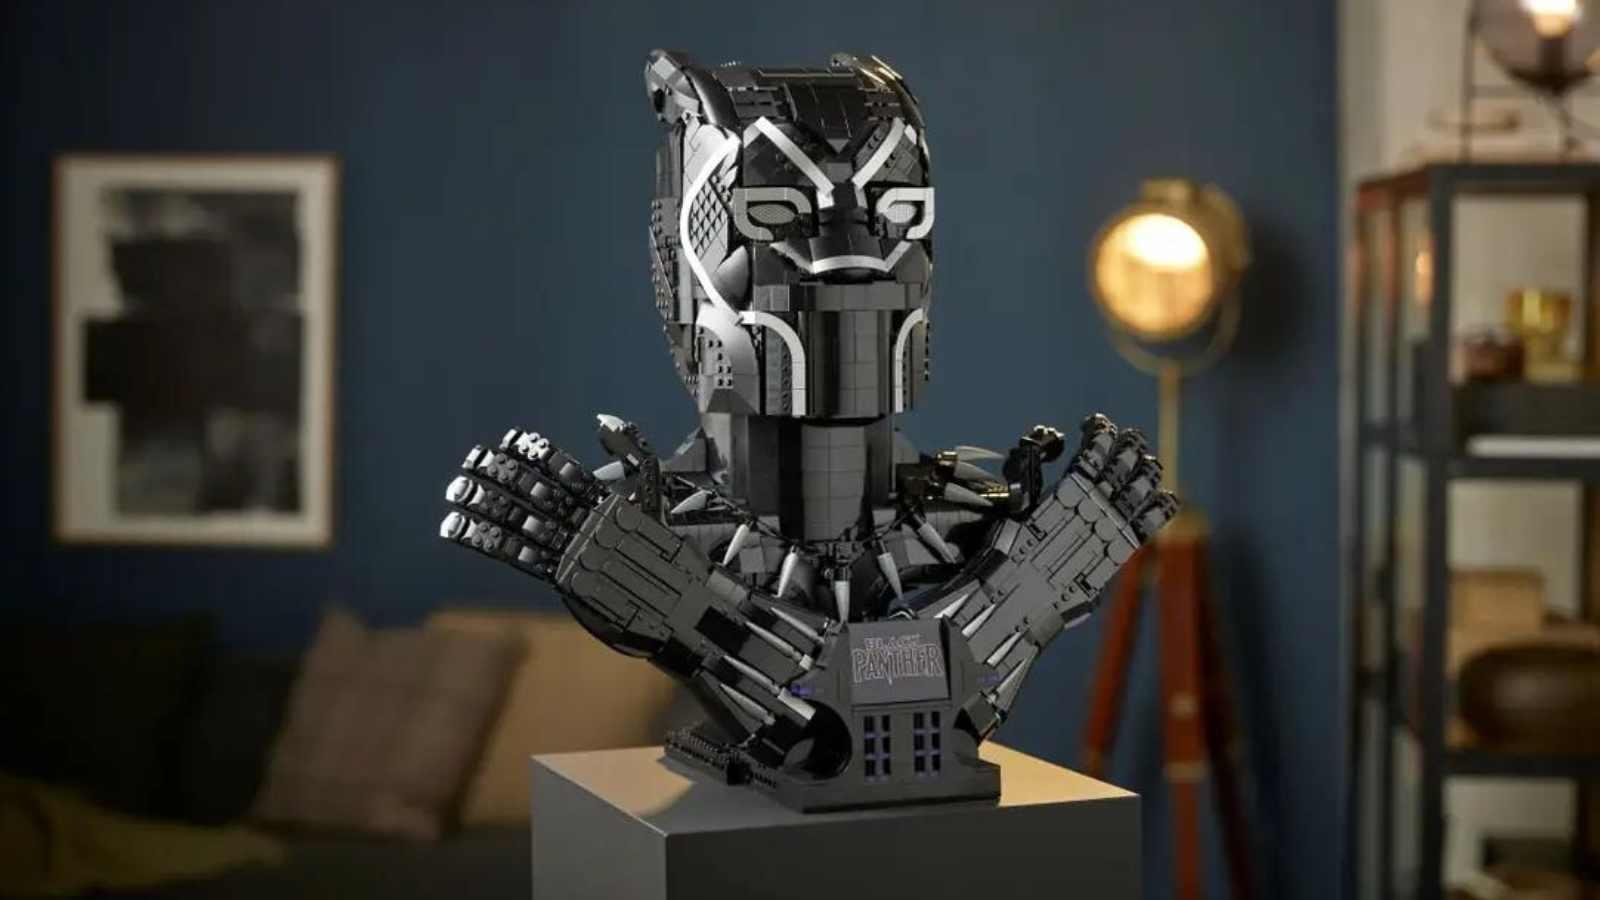 The LEGO Marvel Black Panther on display